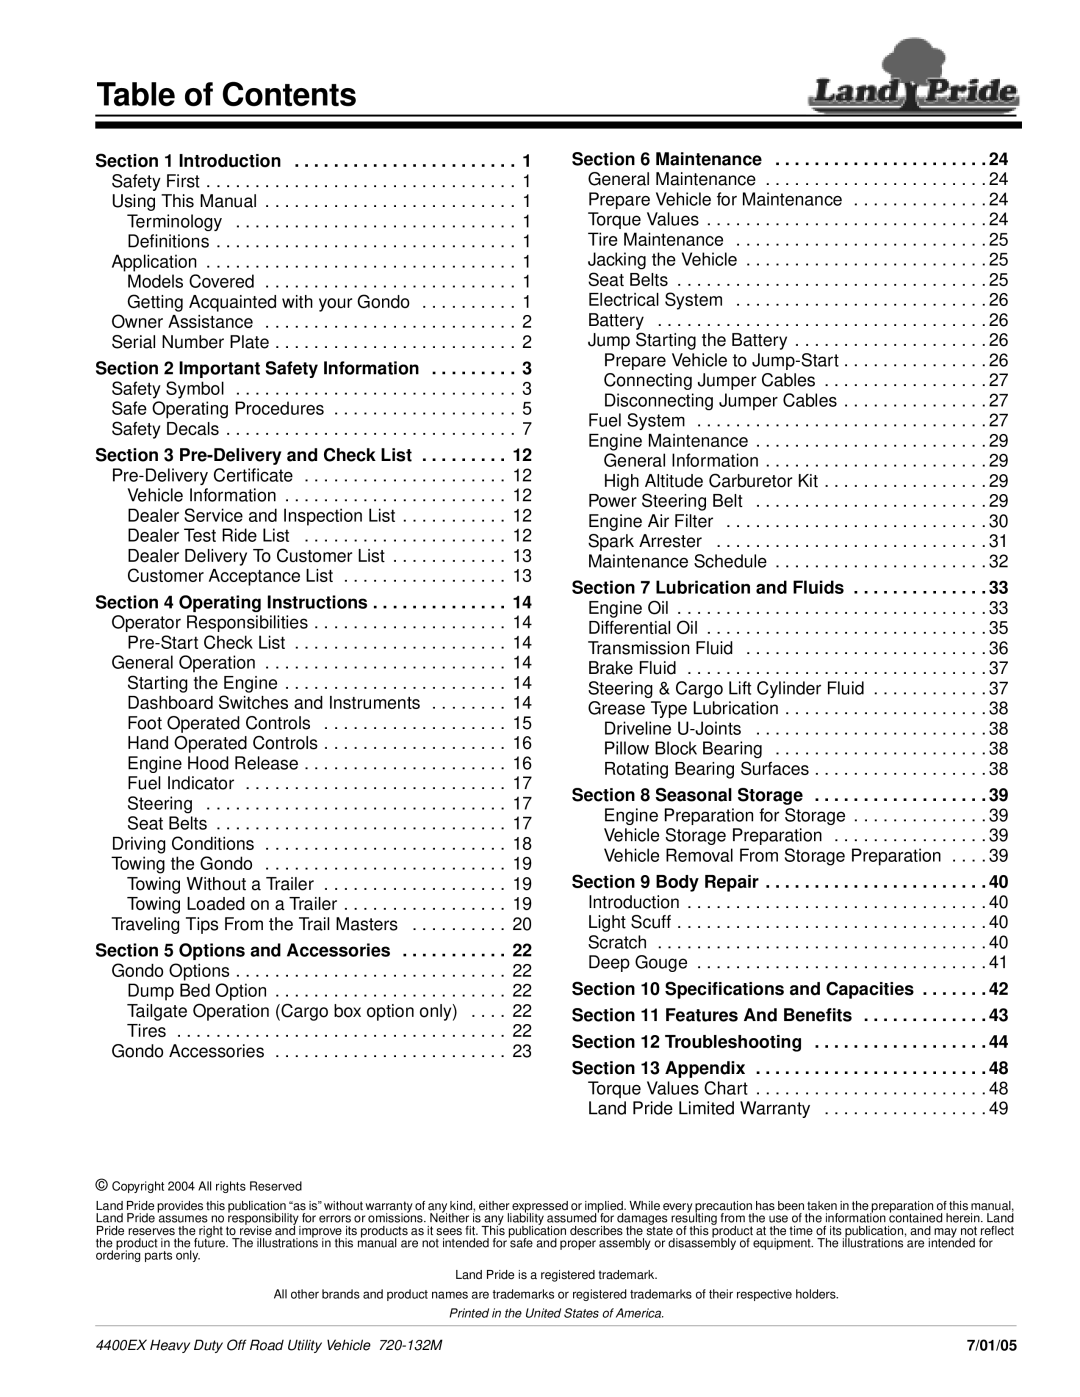 Land Pride 22081 Table of Contents, Important Safety Information, Pre-Delivery and Check List, Lubrication and Fluids 